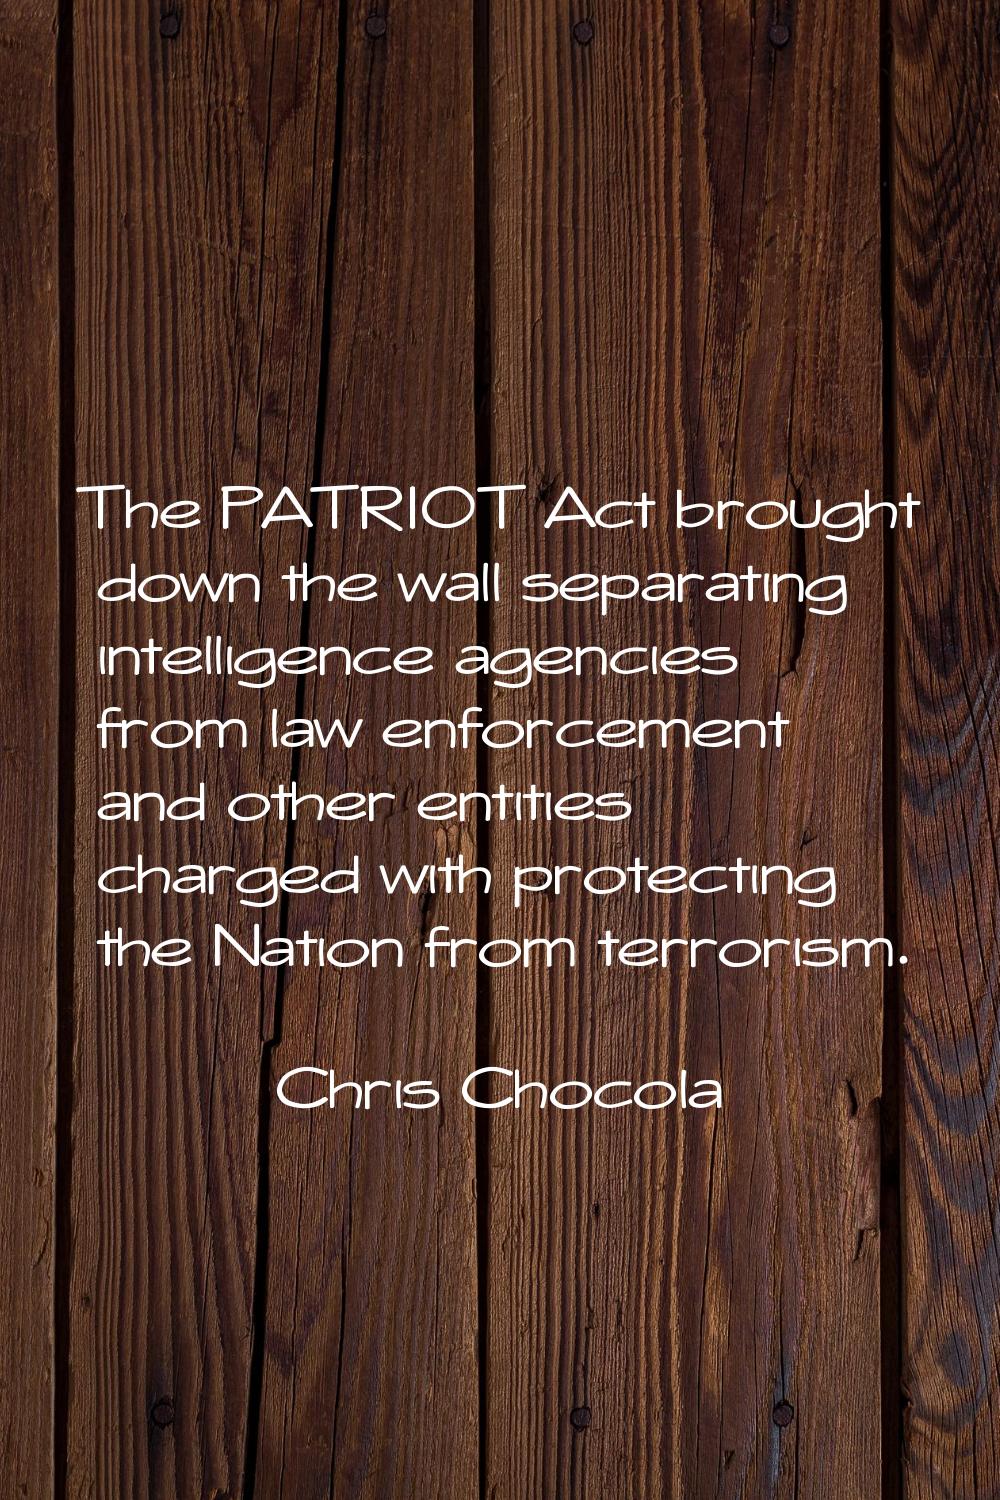 The PATRIOT Act brought down the wall separating intelligence agencies from law enforcement and oth